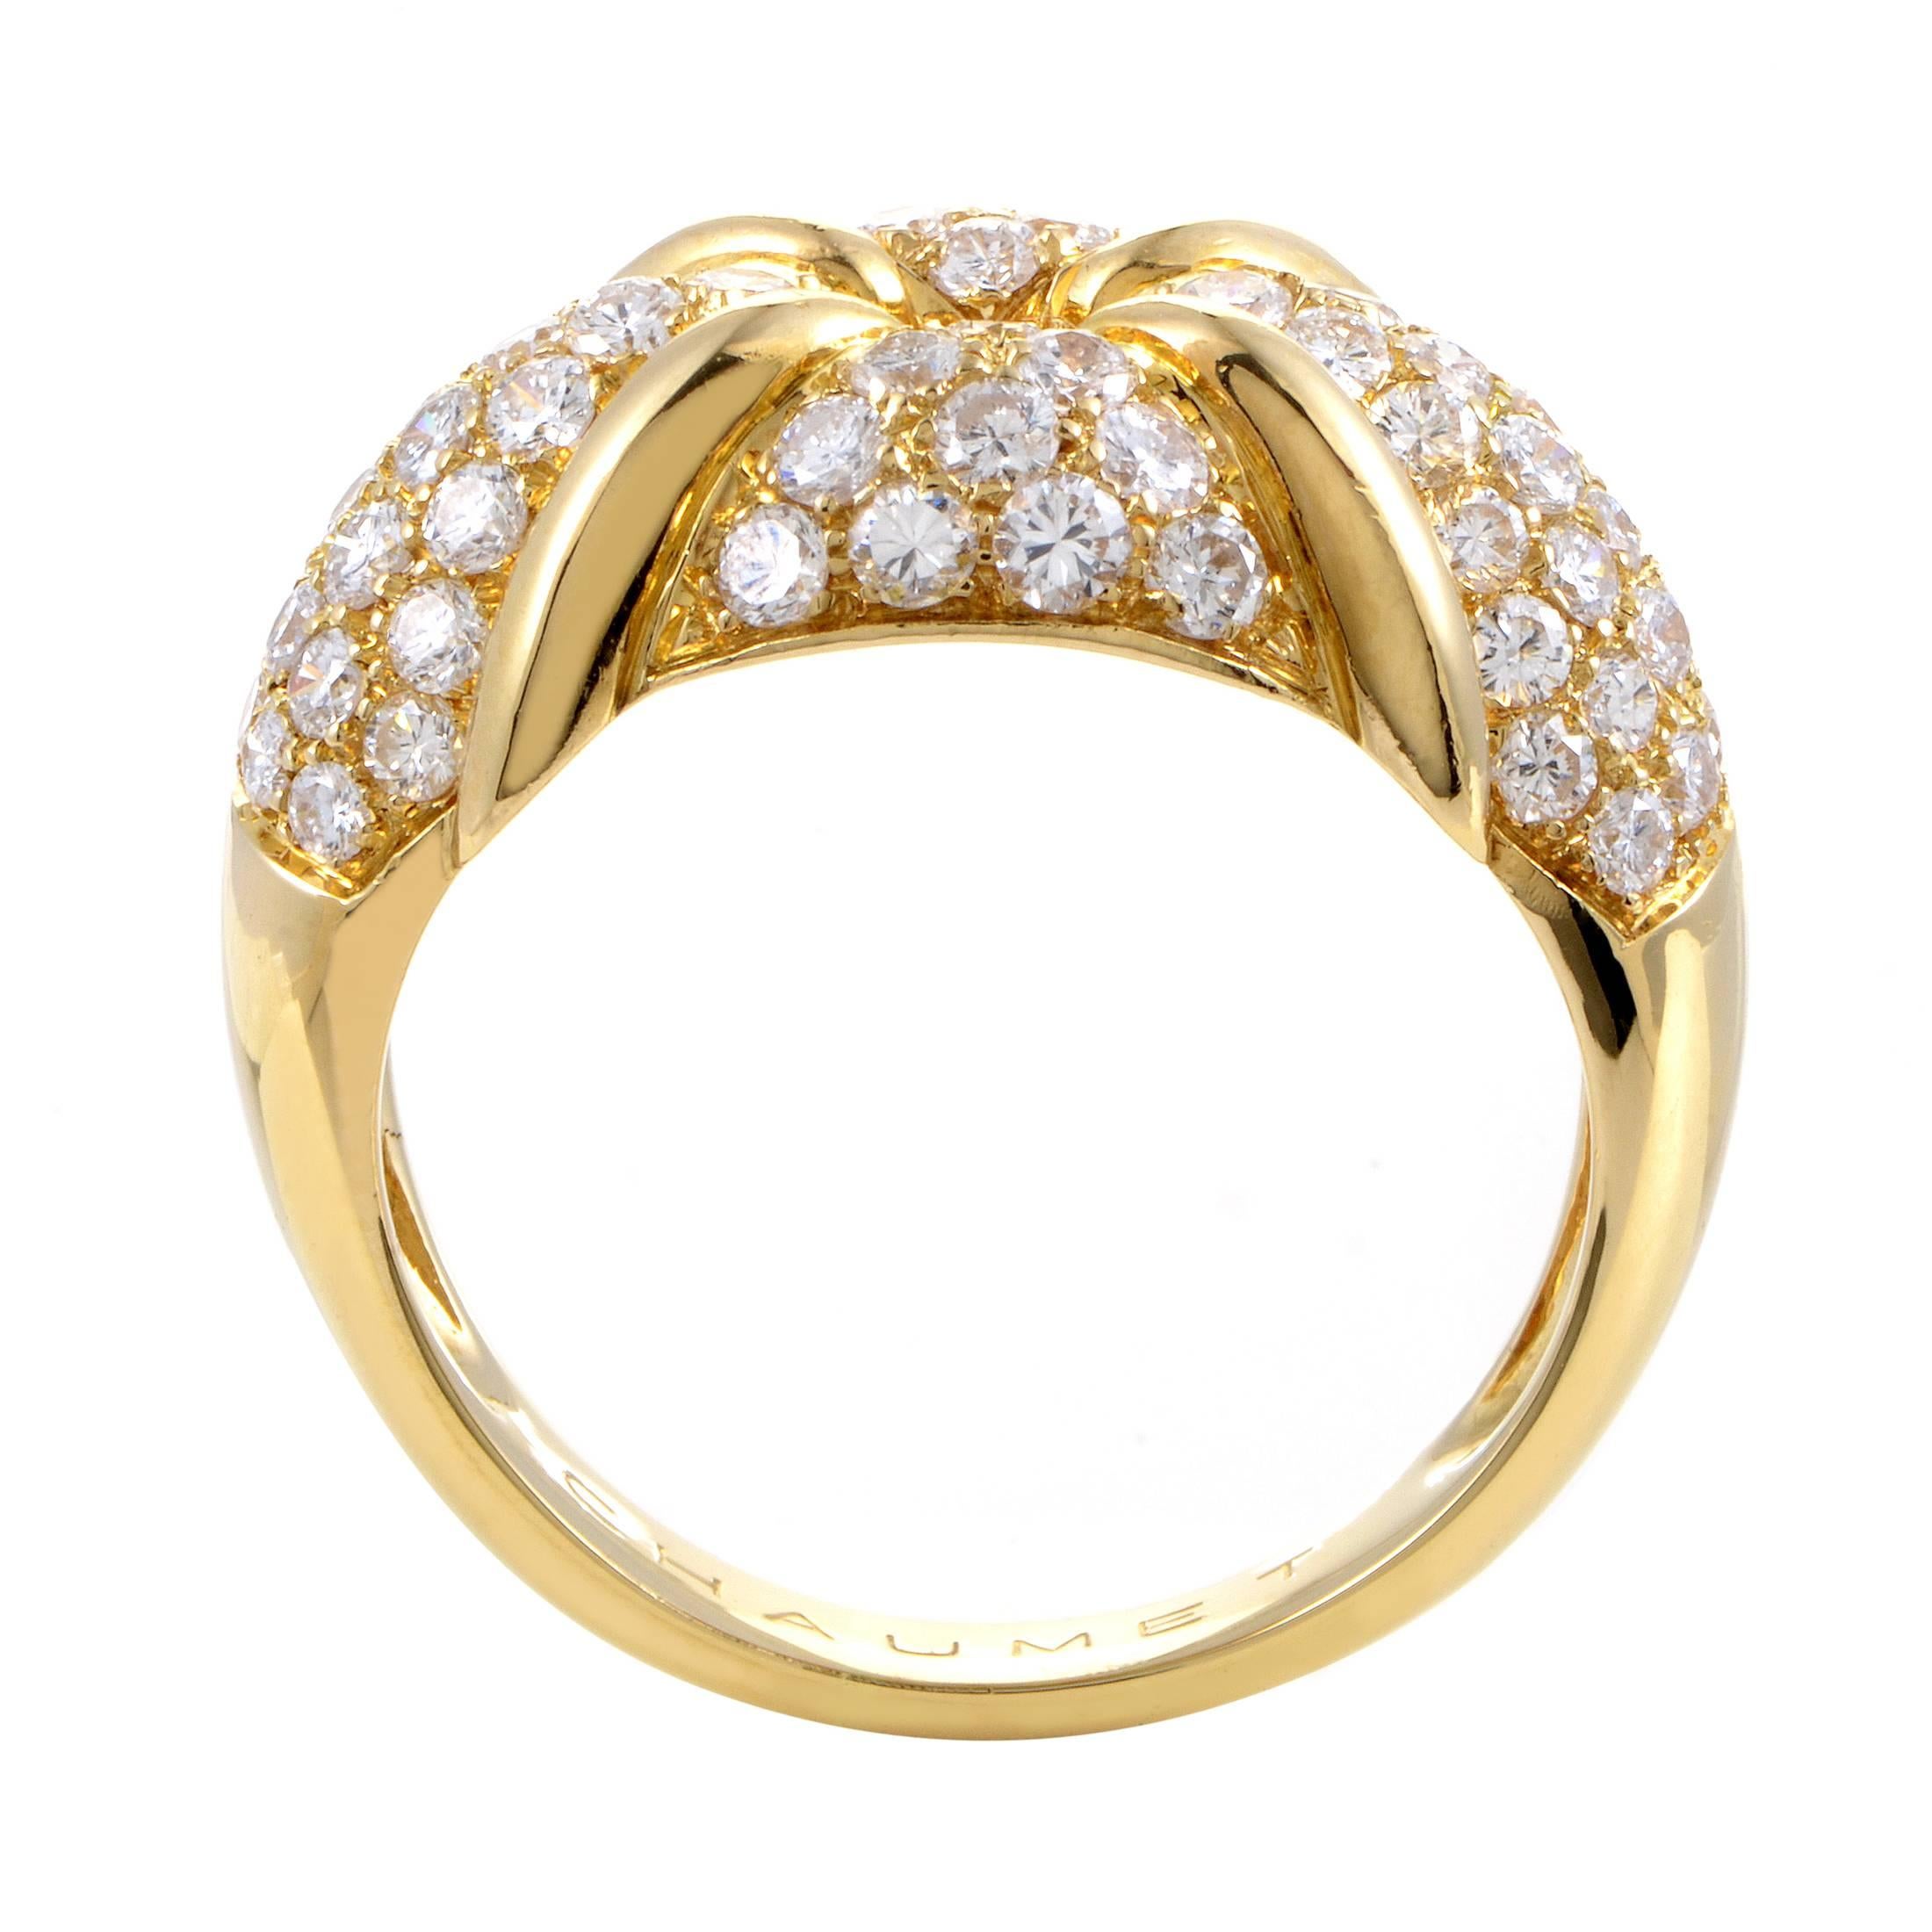 A sight of classic luxury and tasteful flamboyance, this enchanting ring from Chaumet boasts a wonderful shape crafted from precious 18K yellow gold and adorned with lustrous diamonds weighing in total approximately 1.90 carats.
Ring Size: 7.75 (55